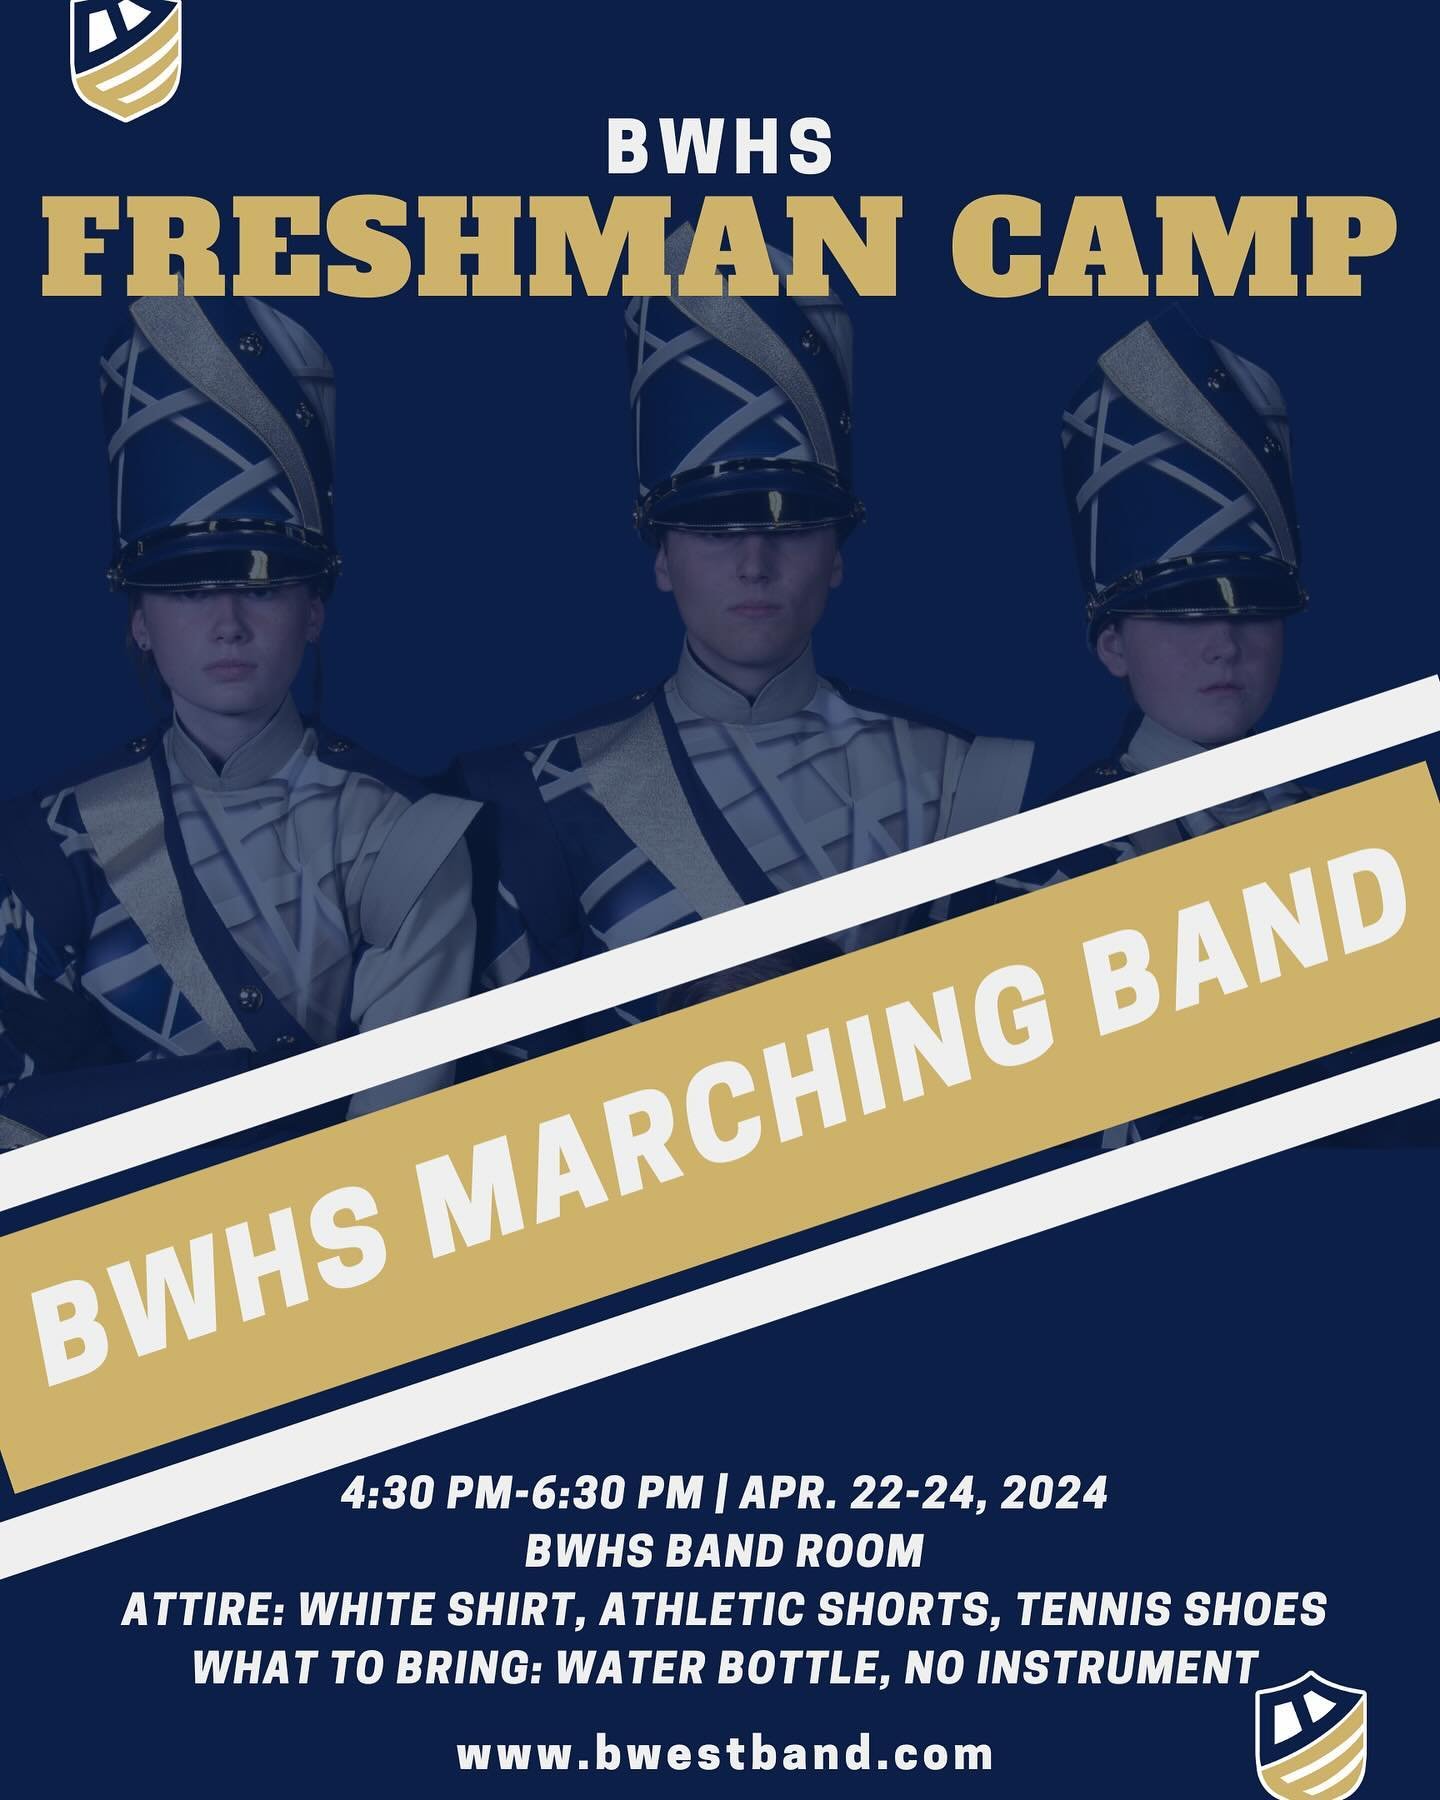 All current 8th graders, all percussion, all color guard, and 2024 Leadership should attend practices next week!! See the flyer for details on what to wear and what to bring!